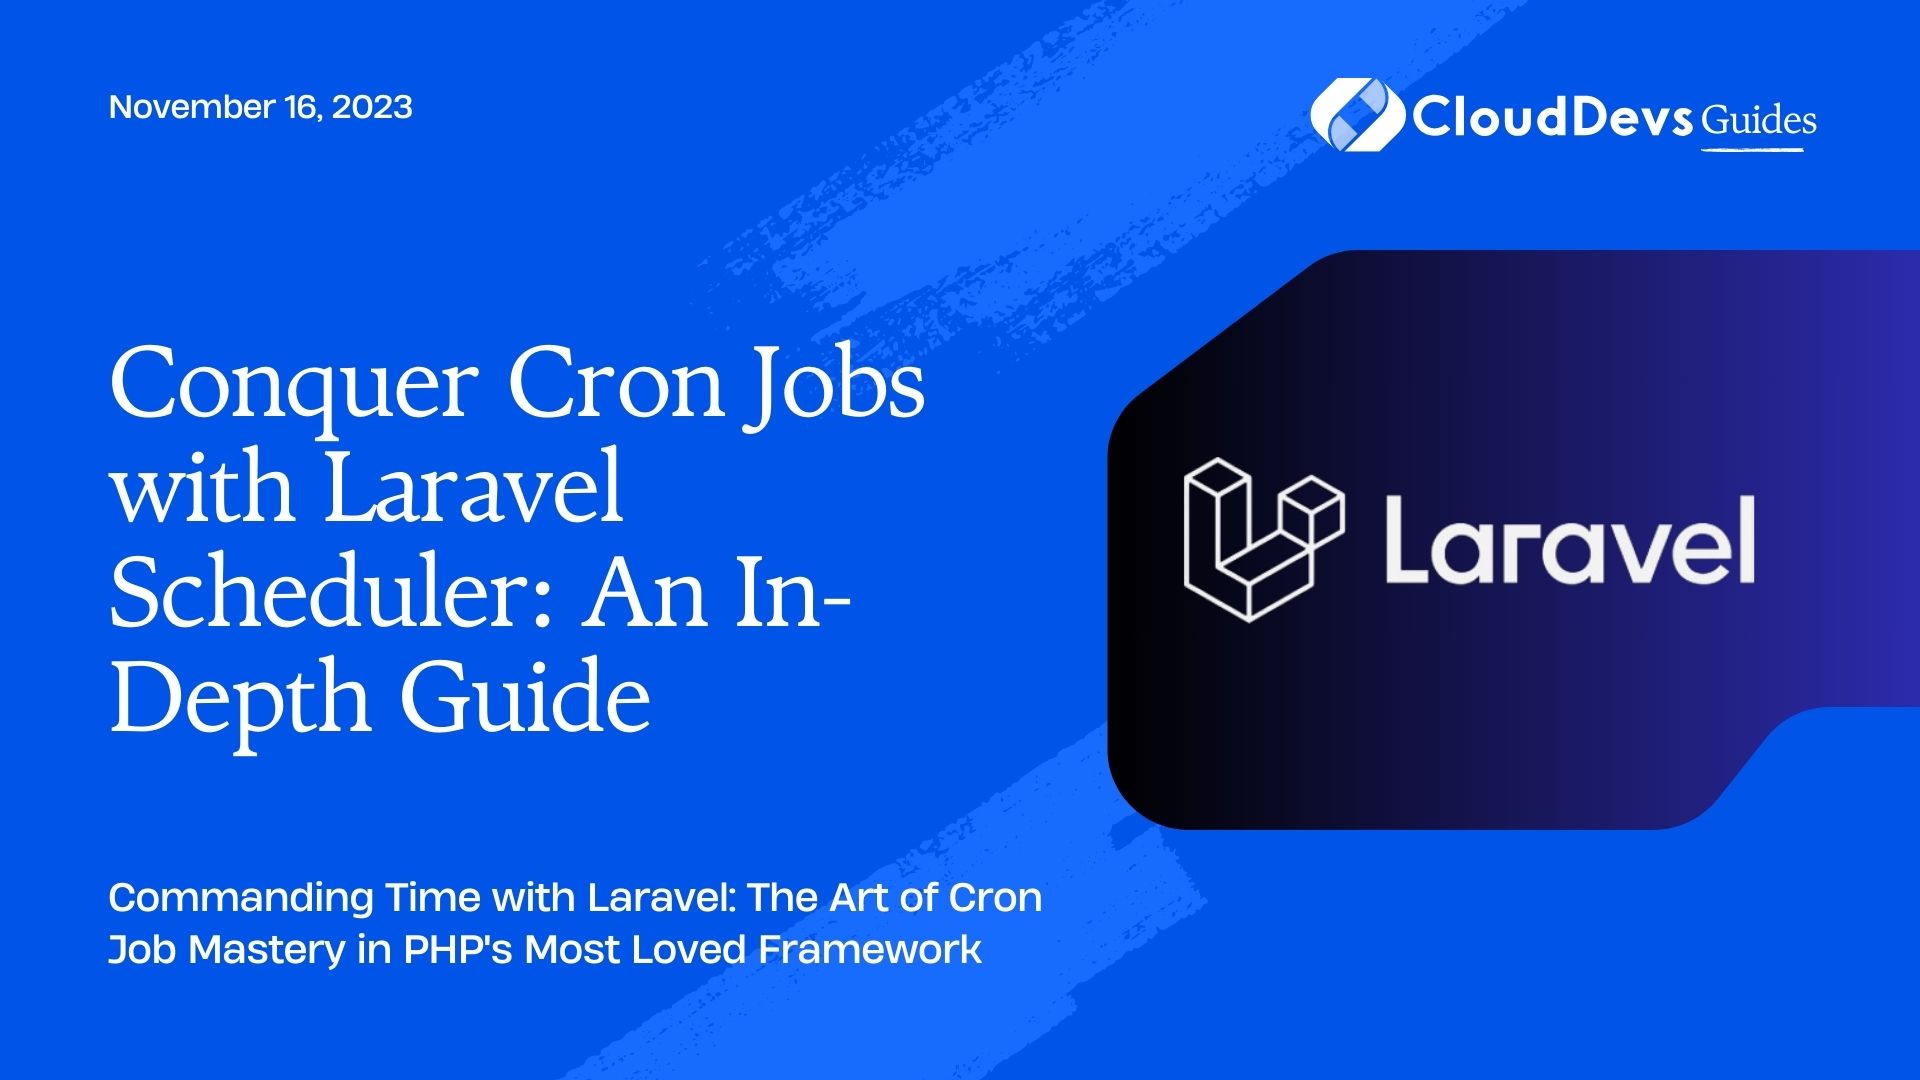 Conquer Cron Jobs with Laravel Scheduler: An In-Depth Guide